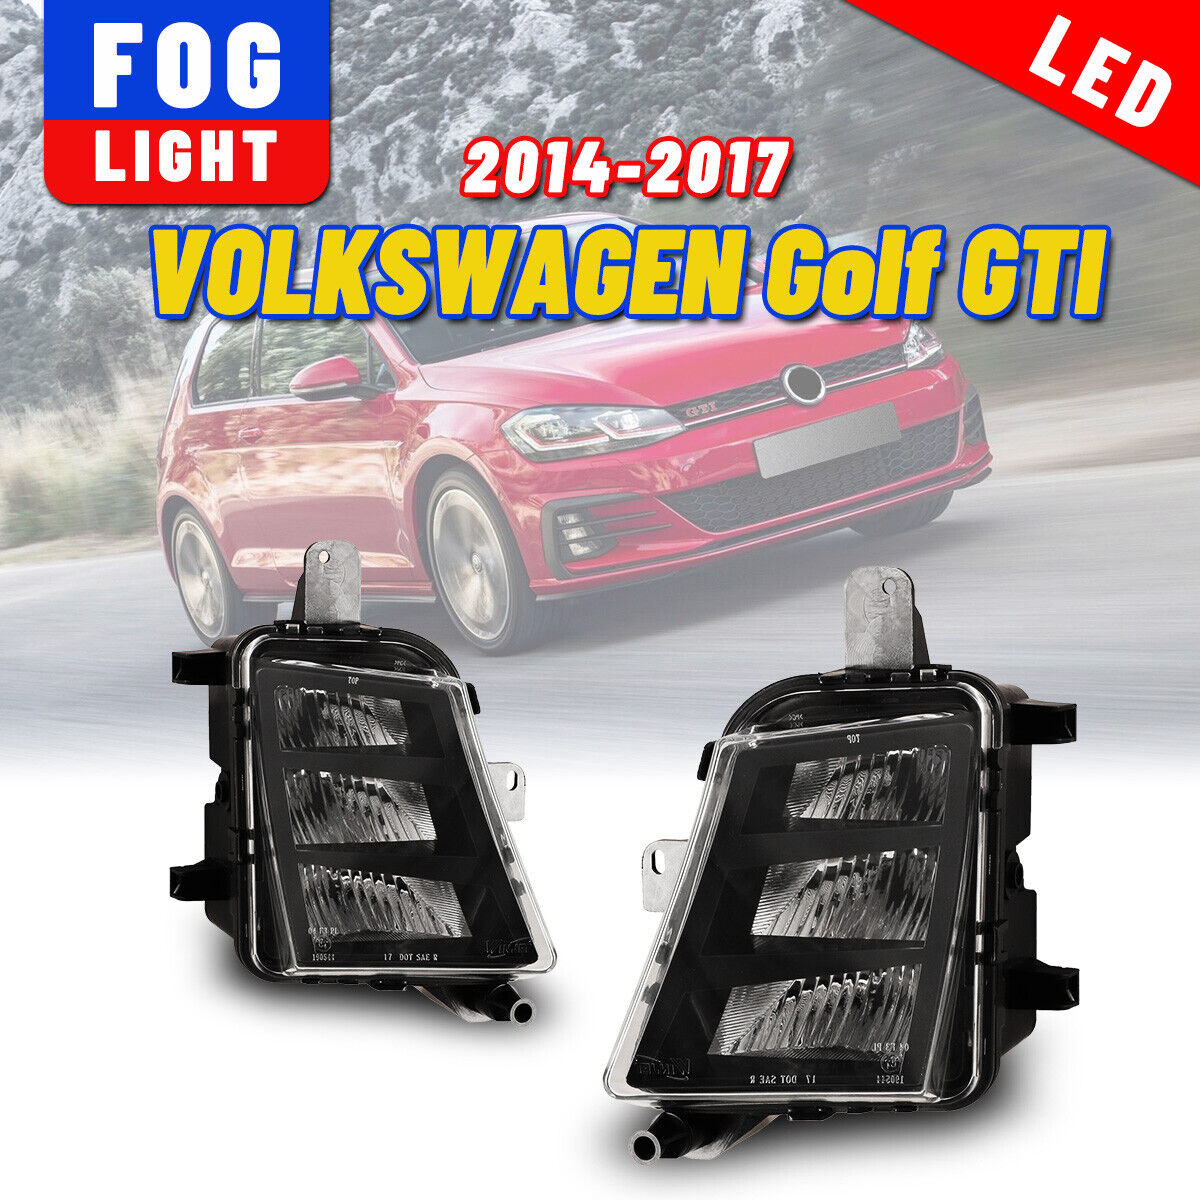 LED Fog Lights for 2014-2017 Volkswagen Golf GTI Driving Lamps Replace Clear Set